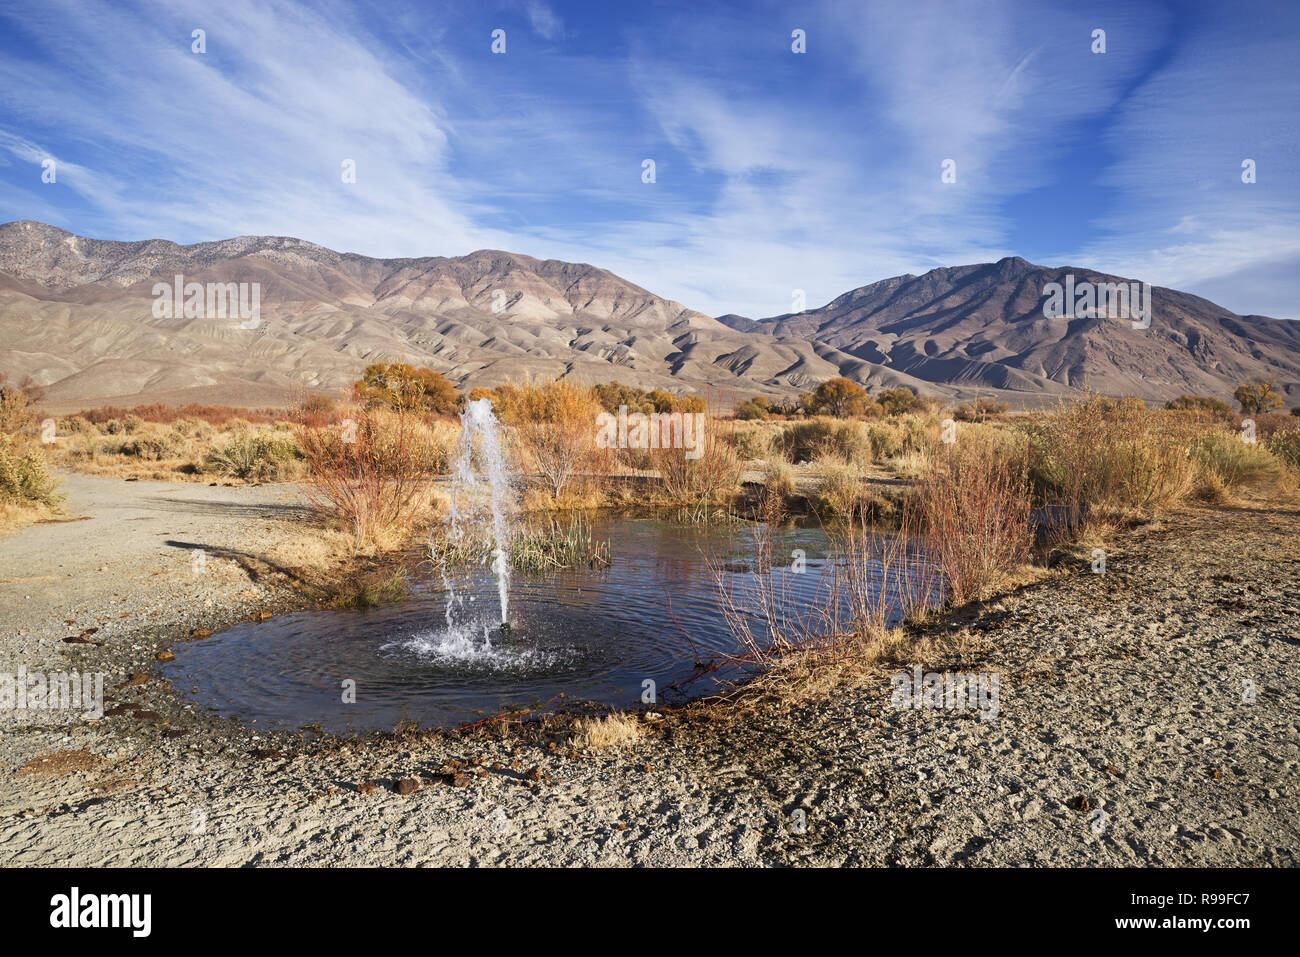 artesian spring in the Owens Valley desert of California with the White Mountains on the horizon Stock Photo